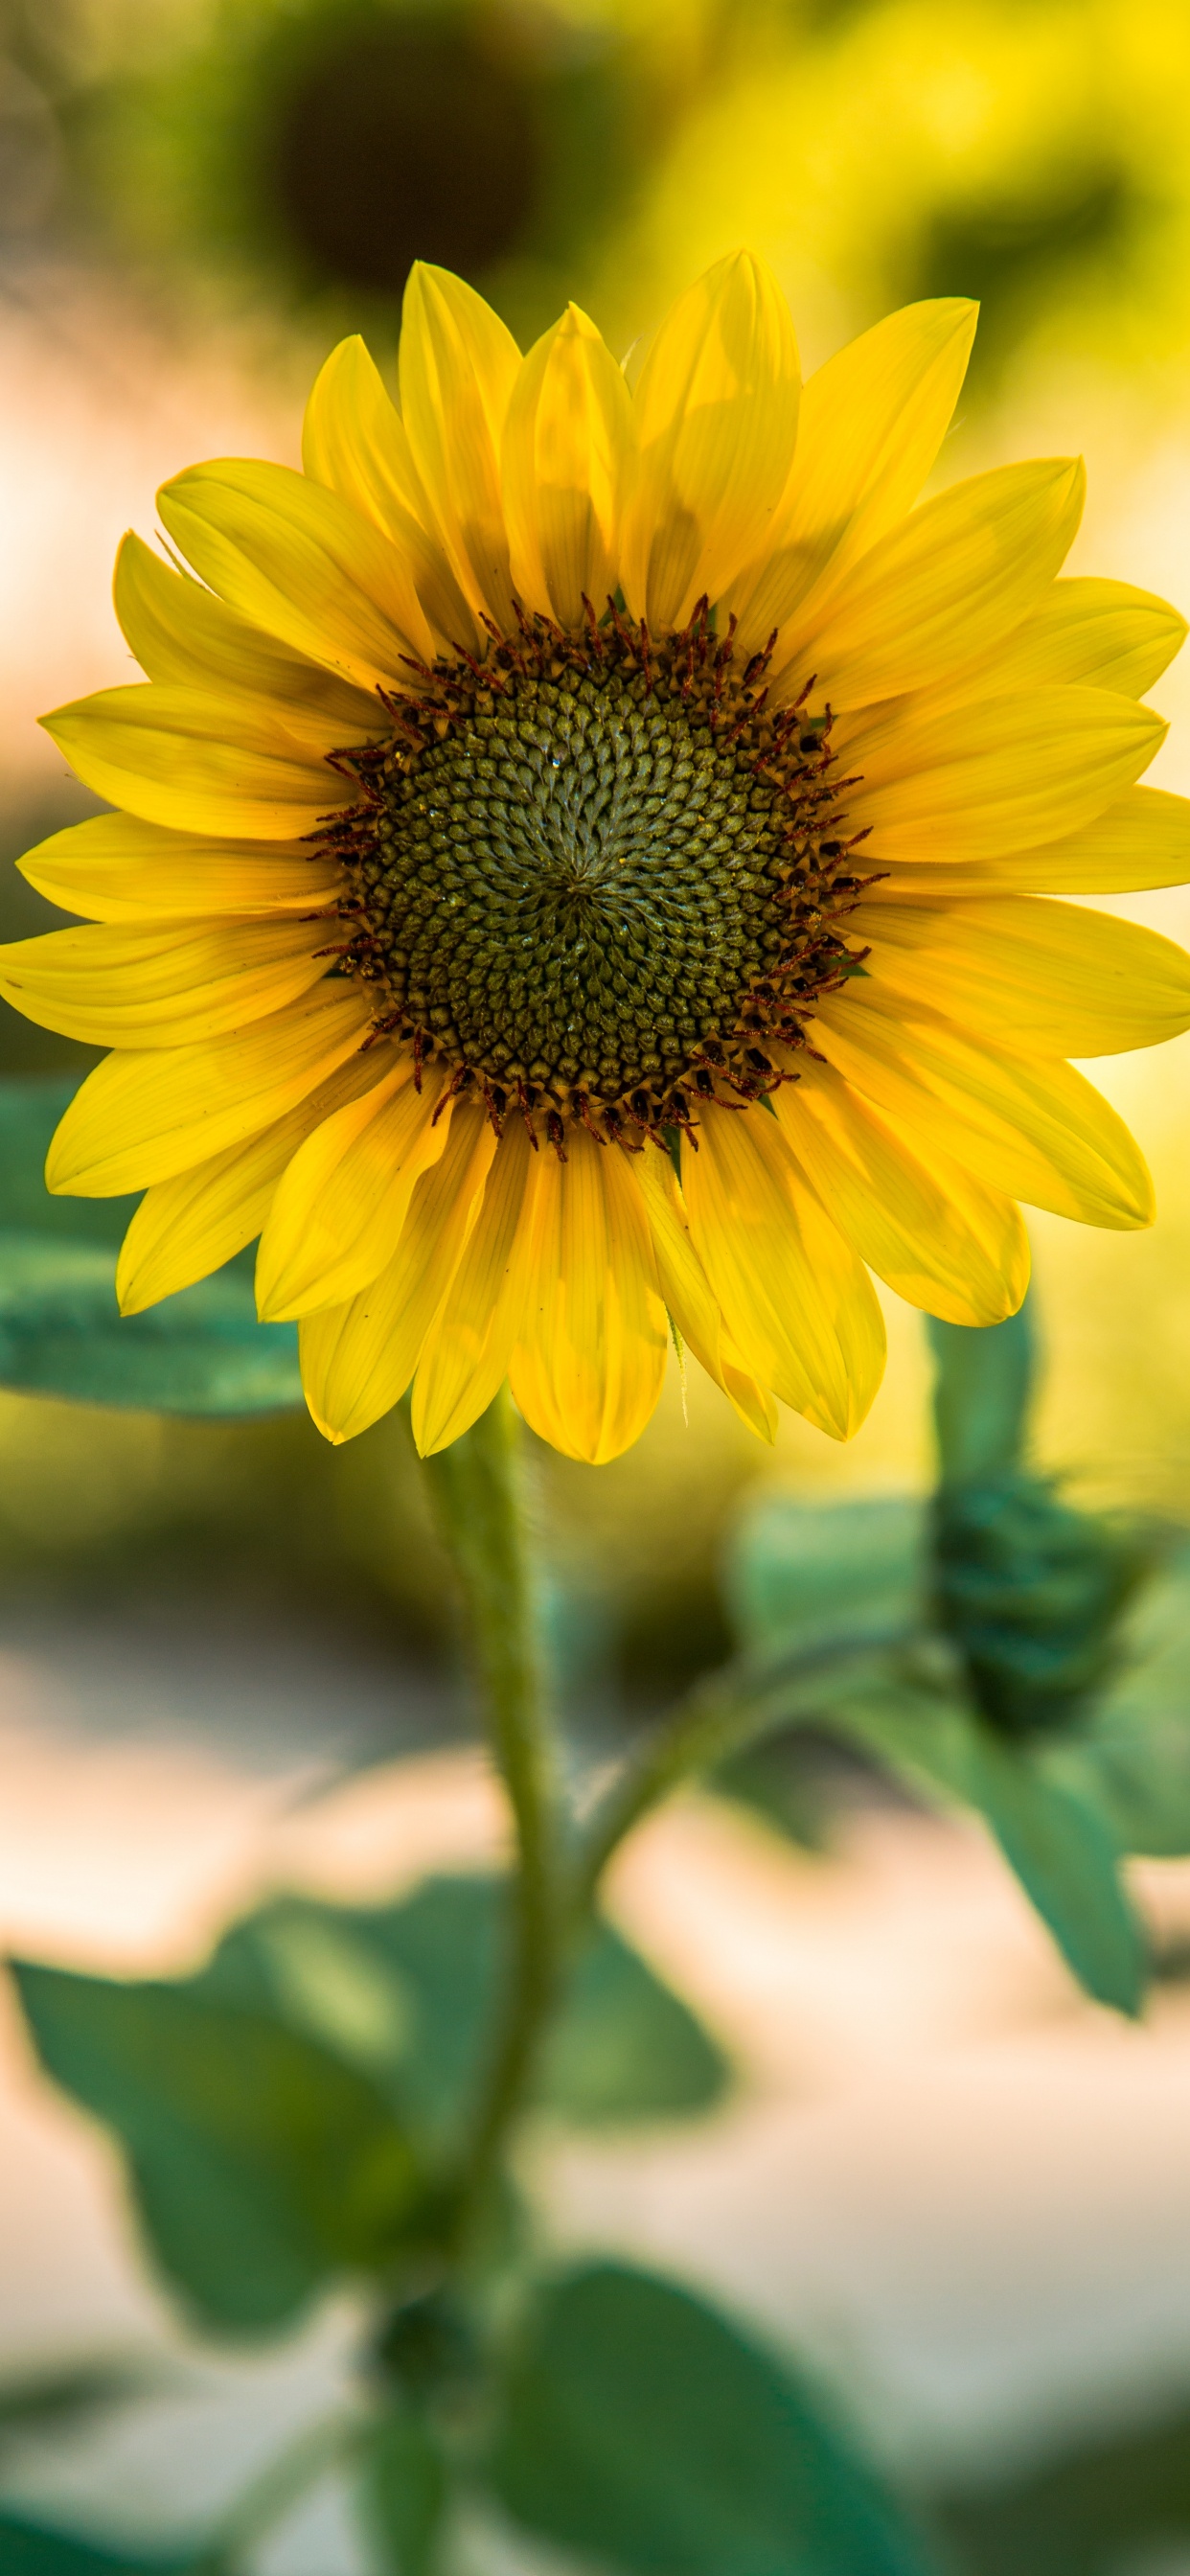 Yellow Sunflower in Close up Photography. Wallpaper in 1242x2688 Resolution